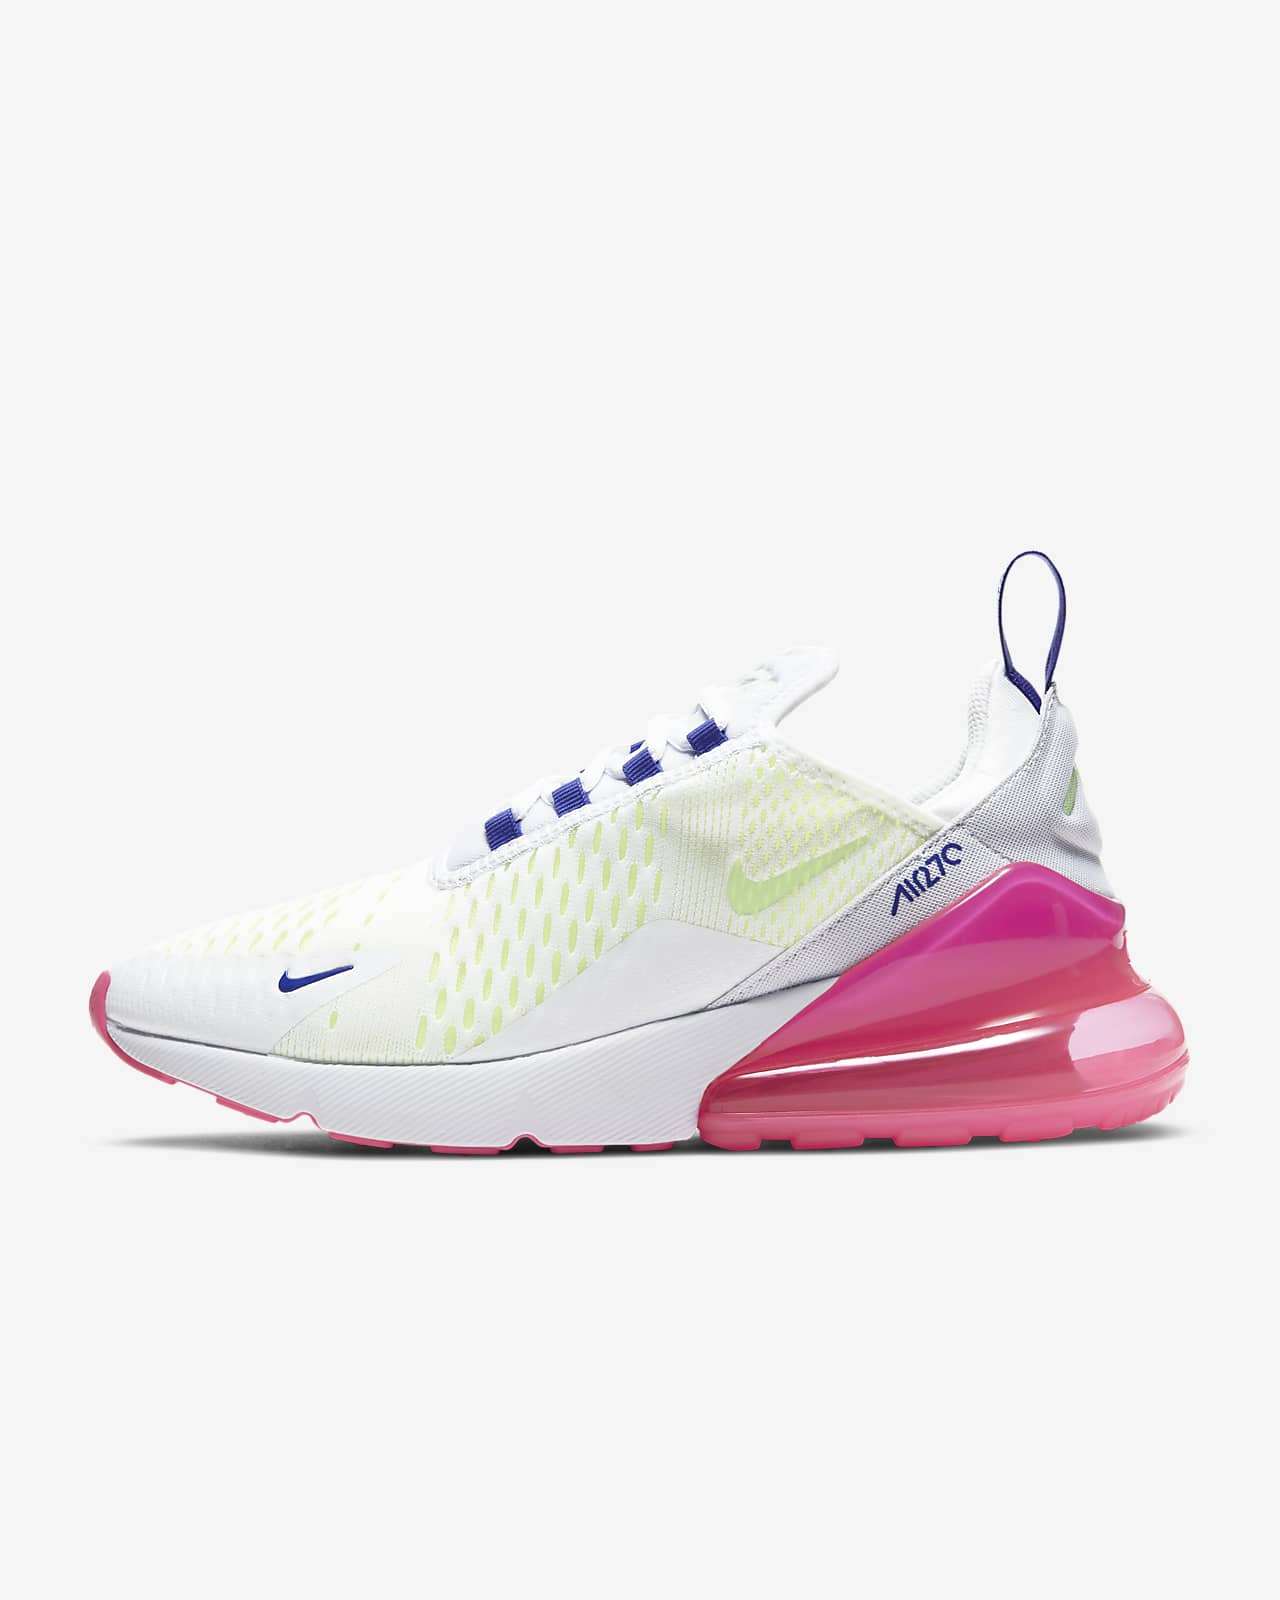 nike air max 270 pink black and white